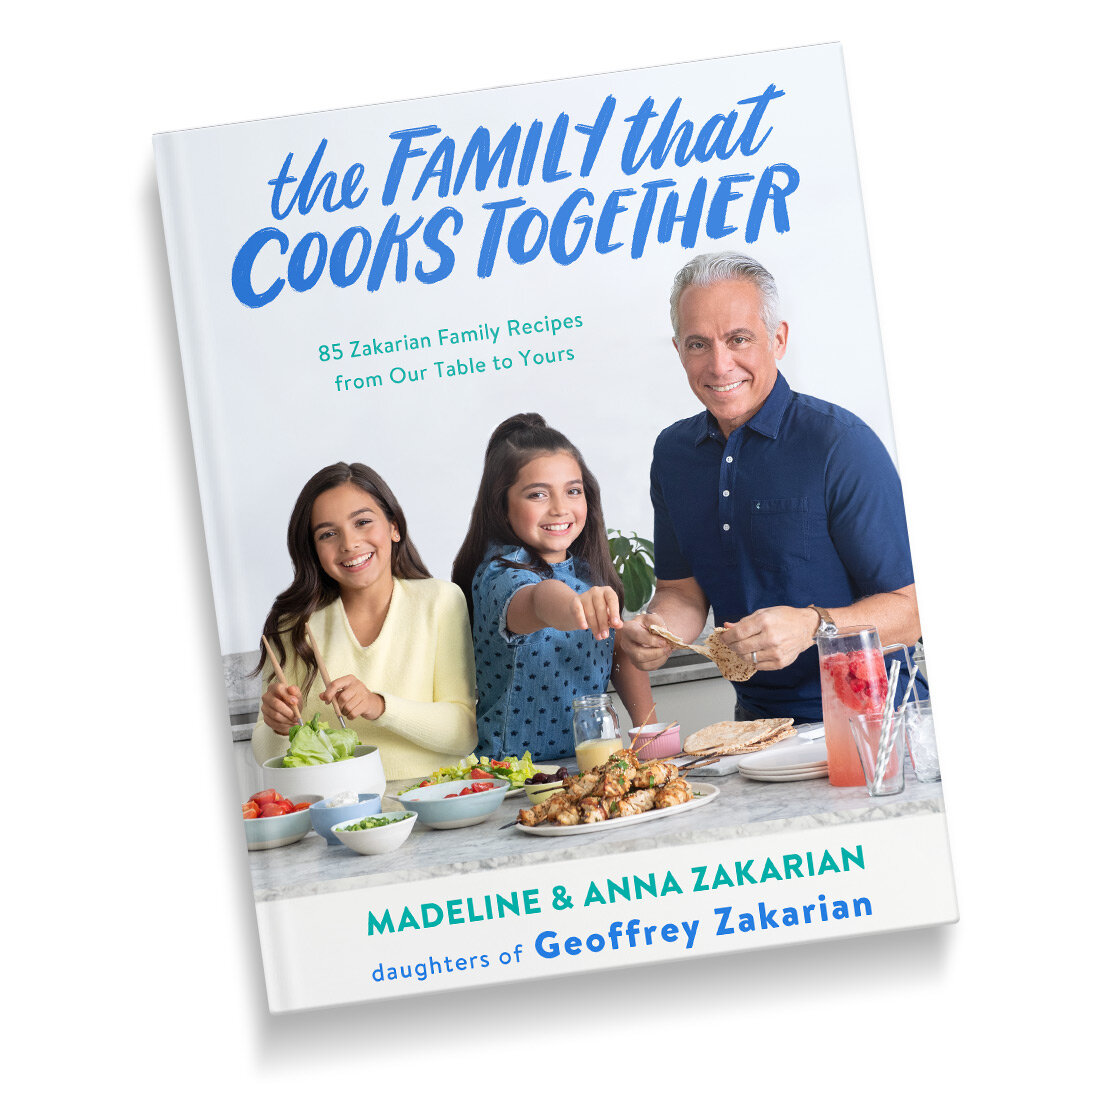 Cooking with family a joy for chef Geoffrey Zakarian, TCC's